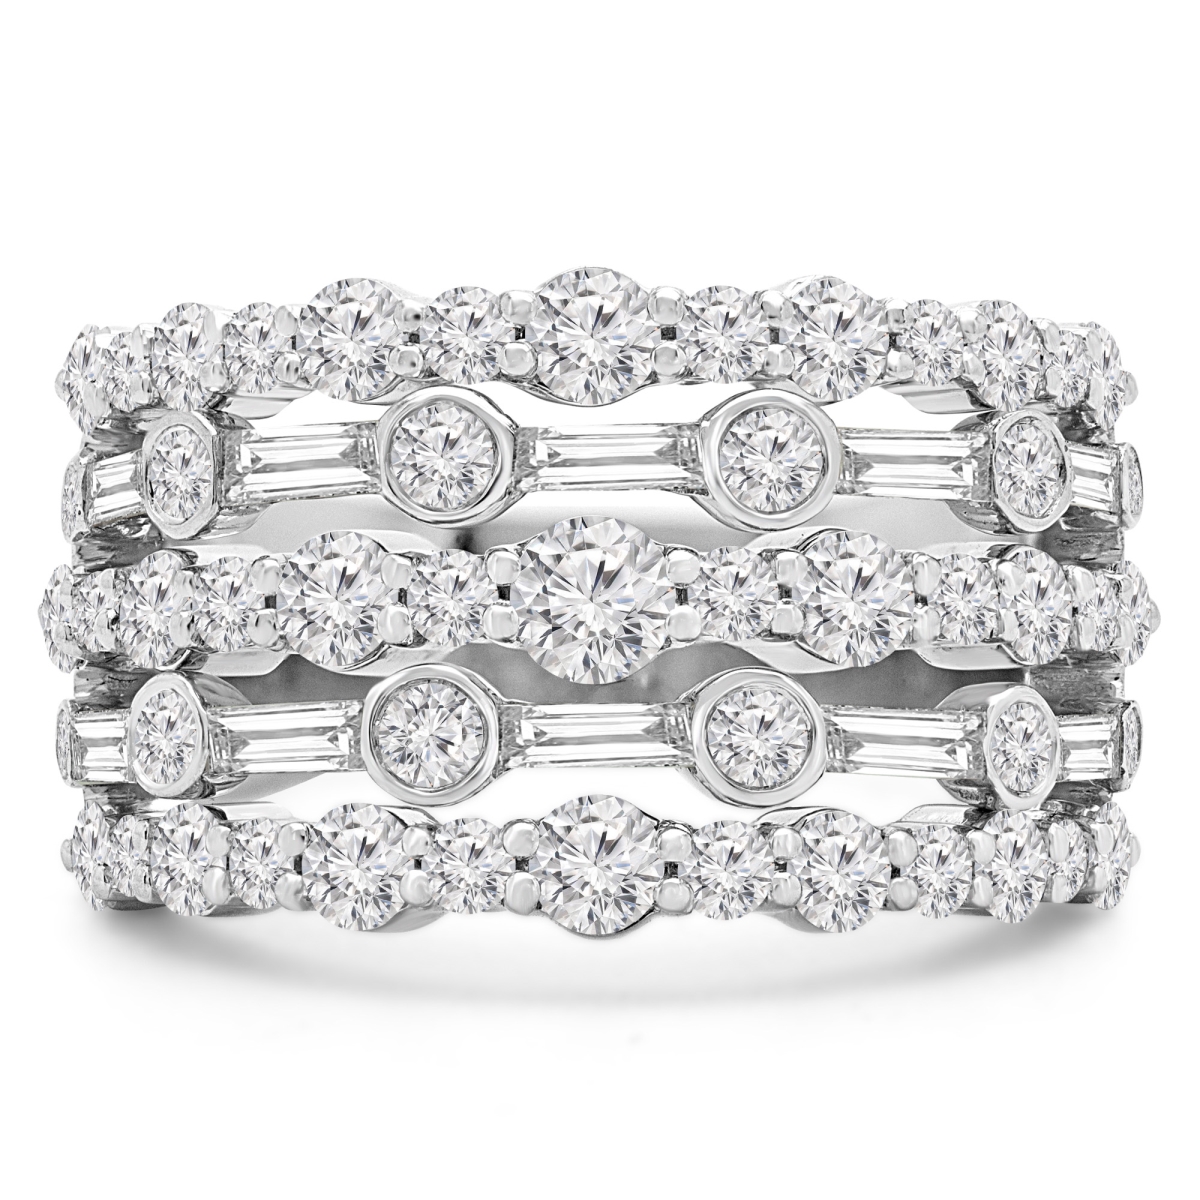 2.125 Ctw Round Diamond Vintage Five-row Cocktail Ring In 18k White Gold - Size 3.5